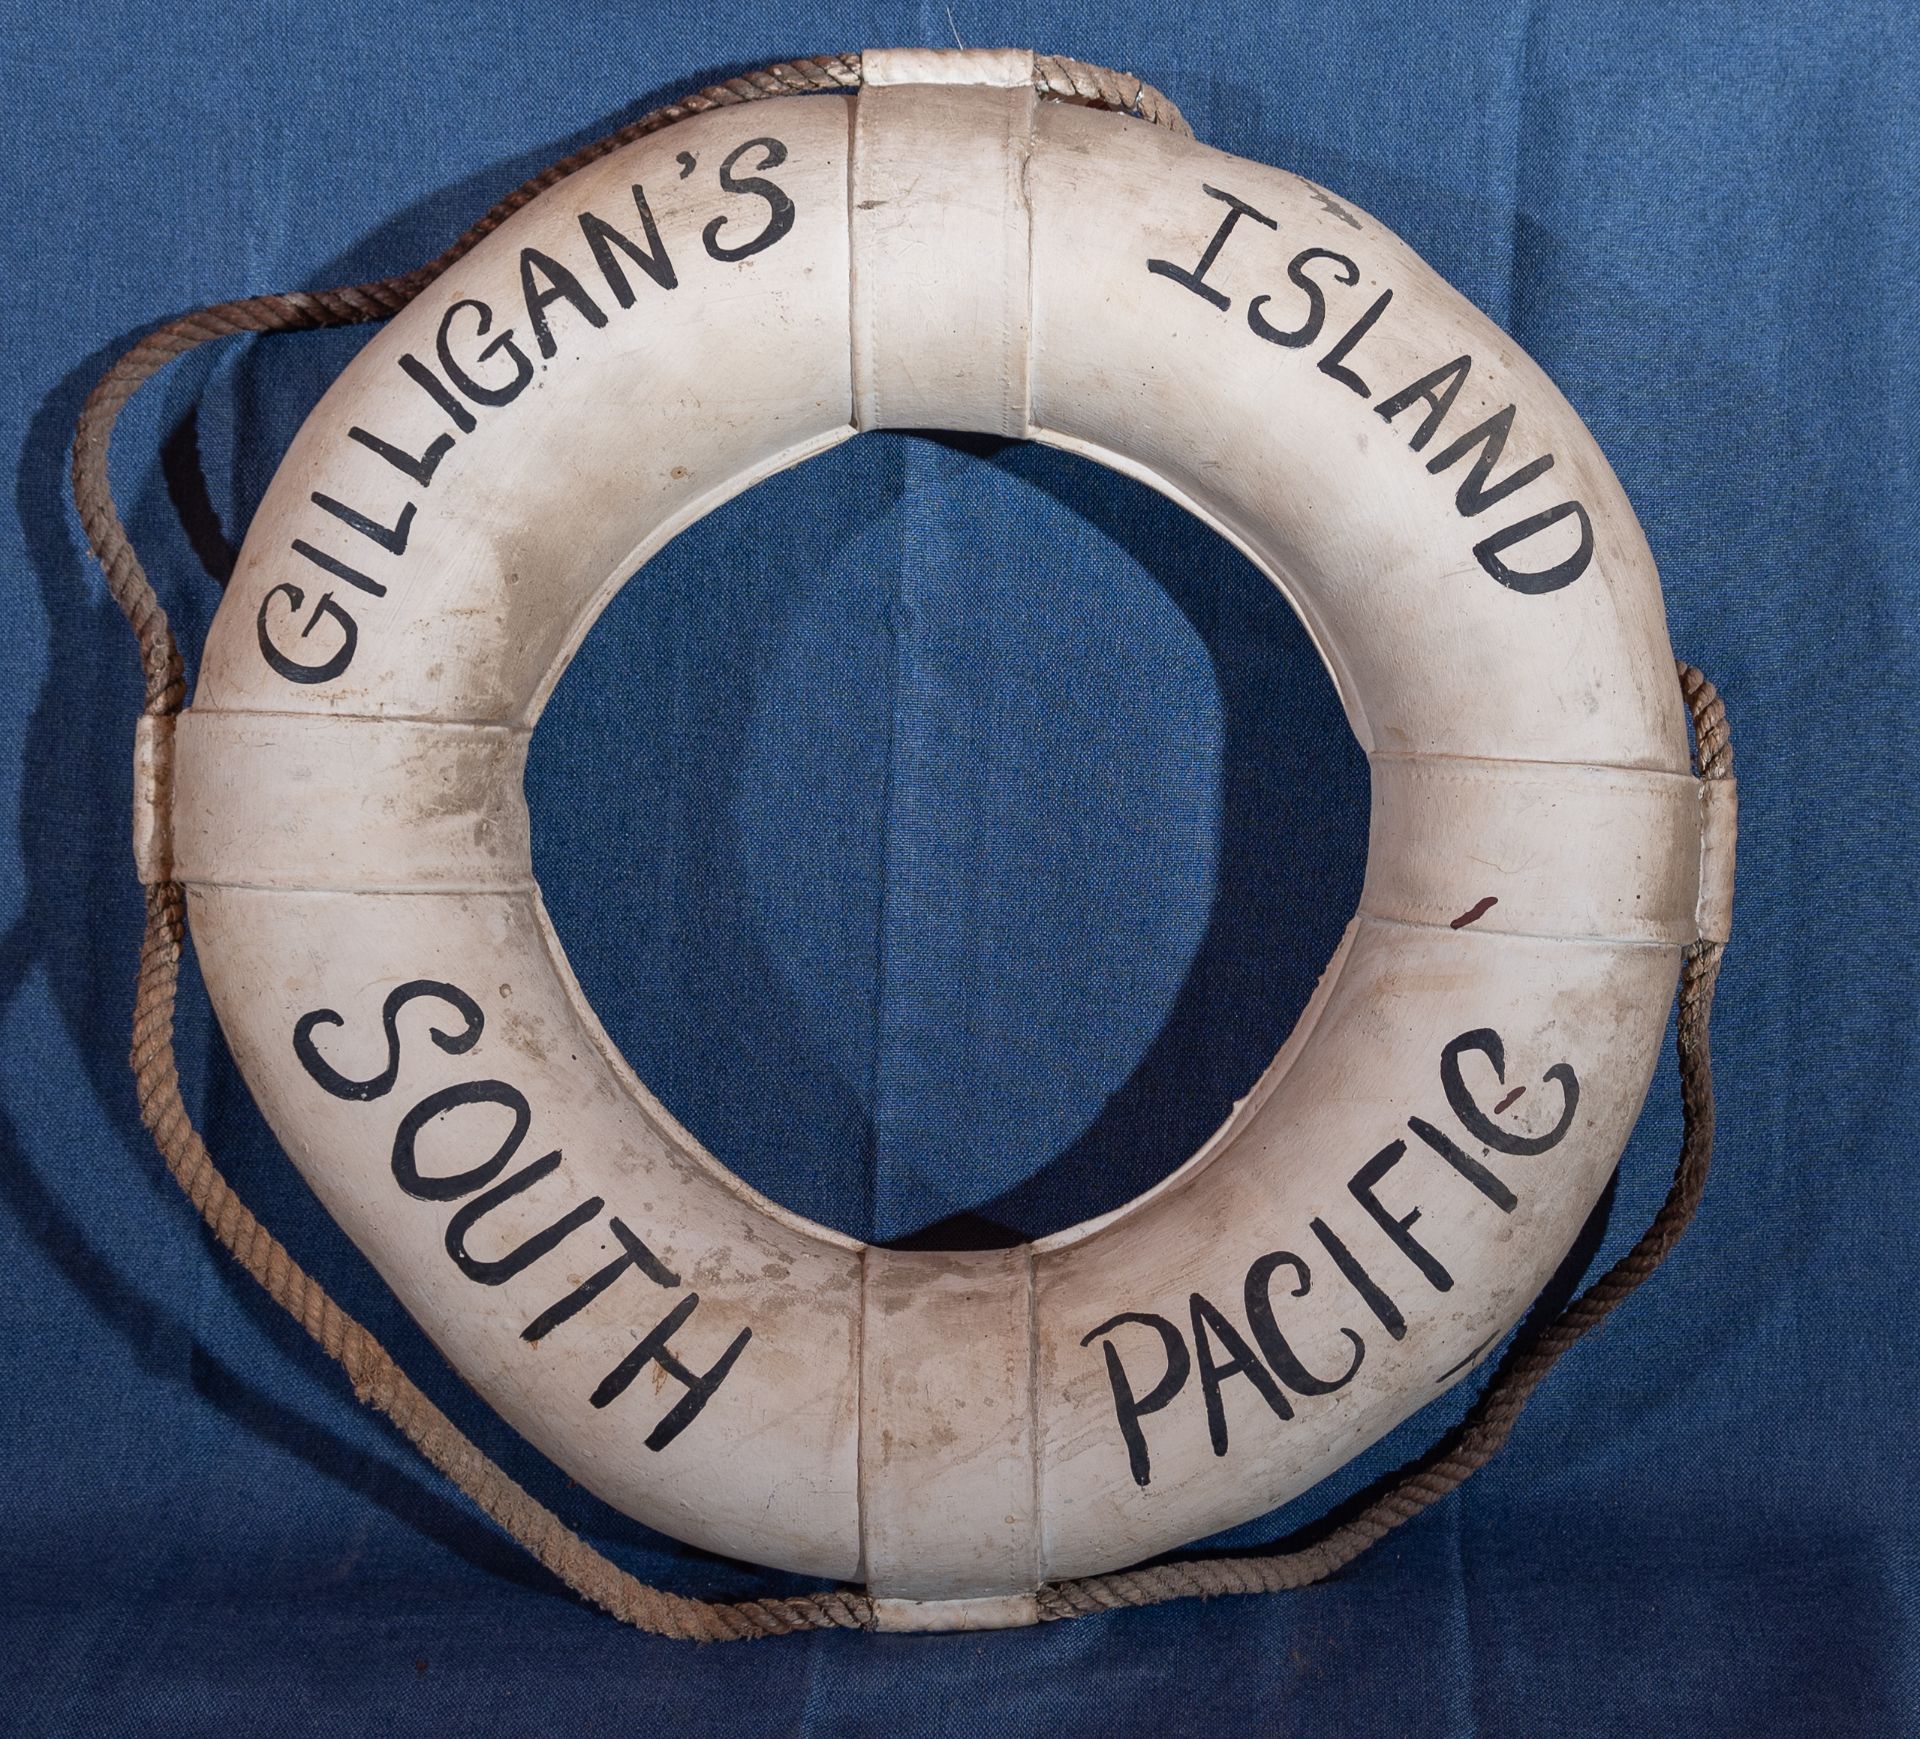 Throw Ring Floatation Device "Gilligan's Island South Pacific" 23"